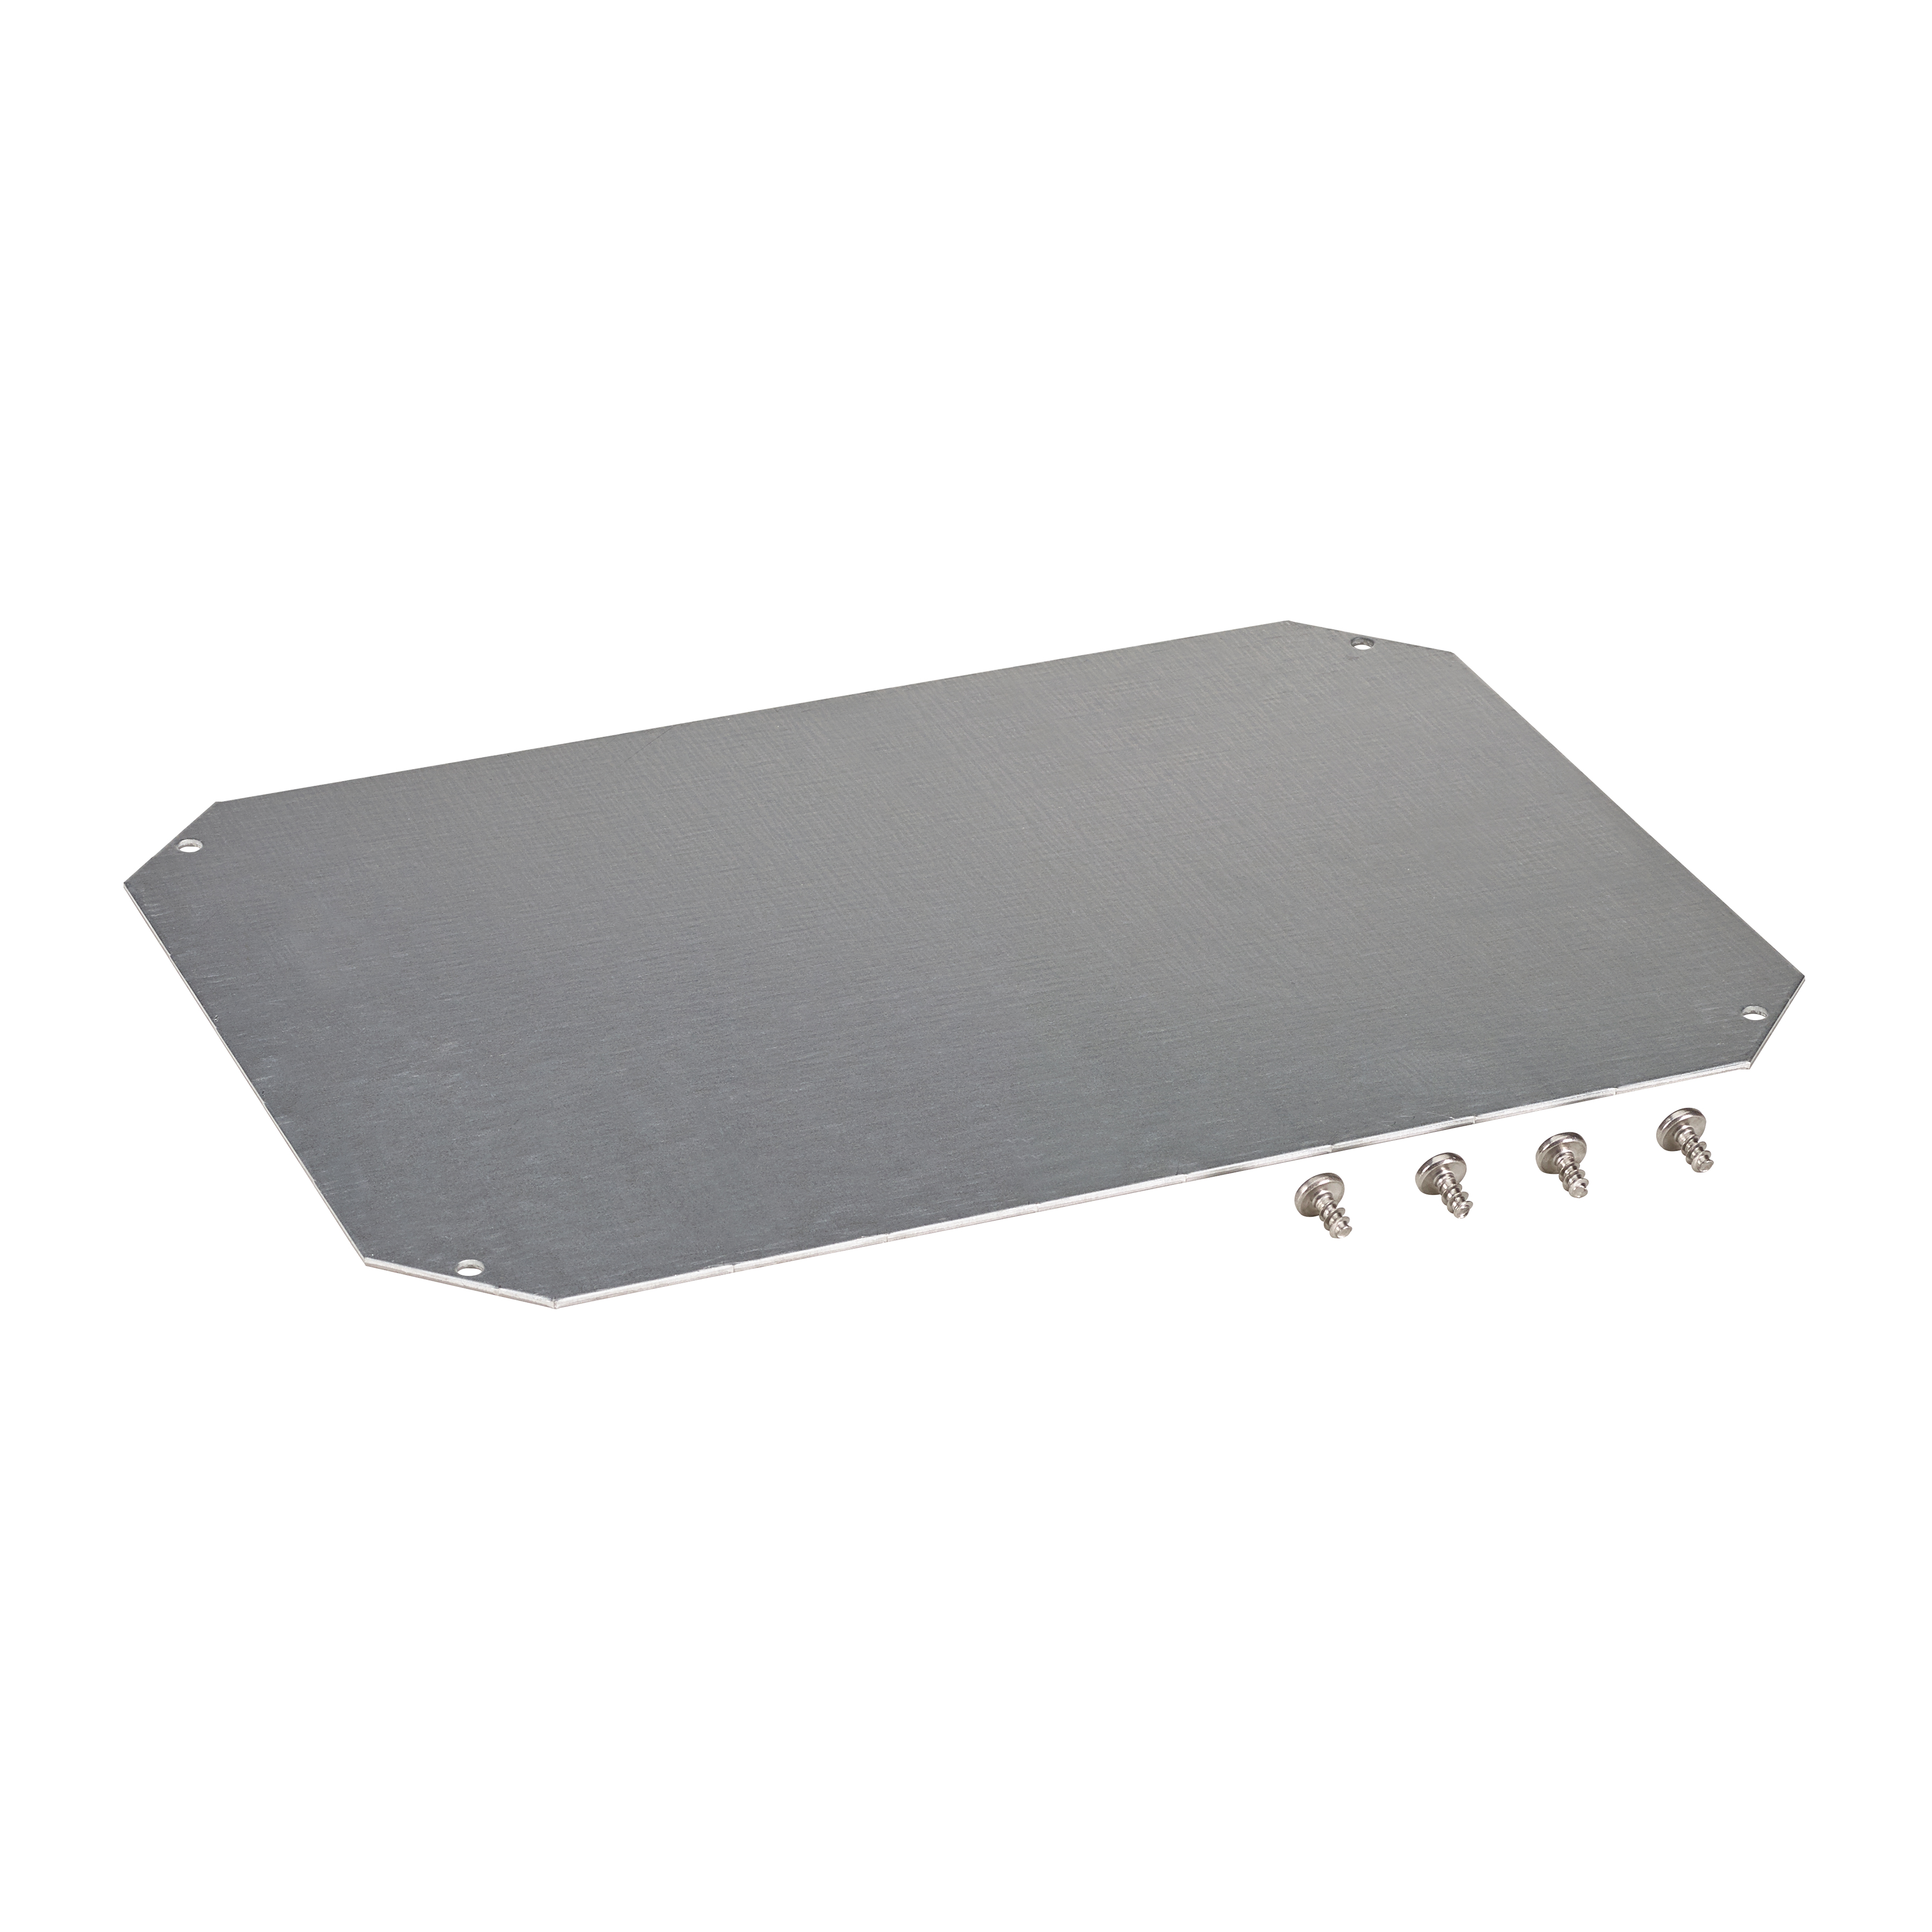 MPMP ARCA 6040 Mounting plate multiperforated